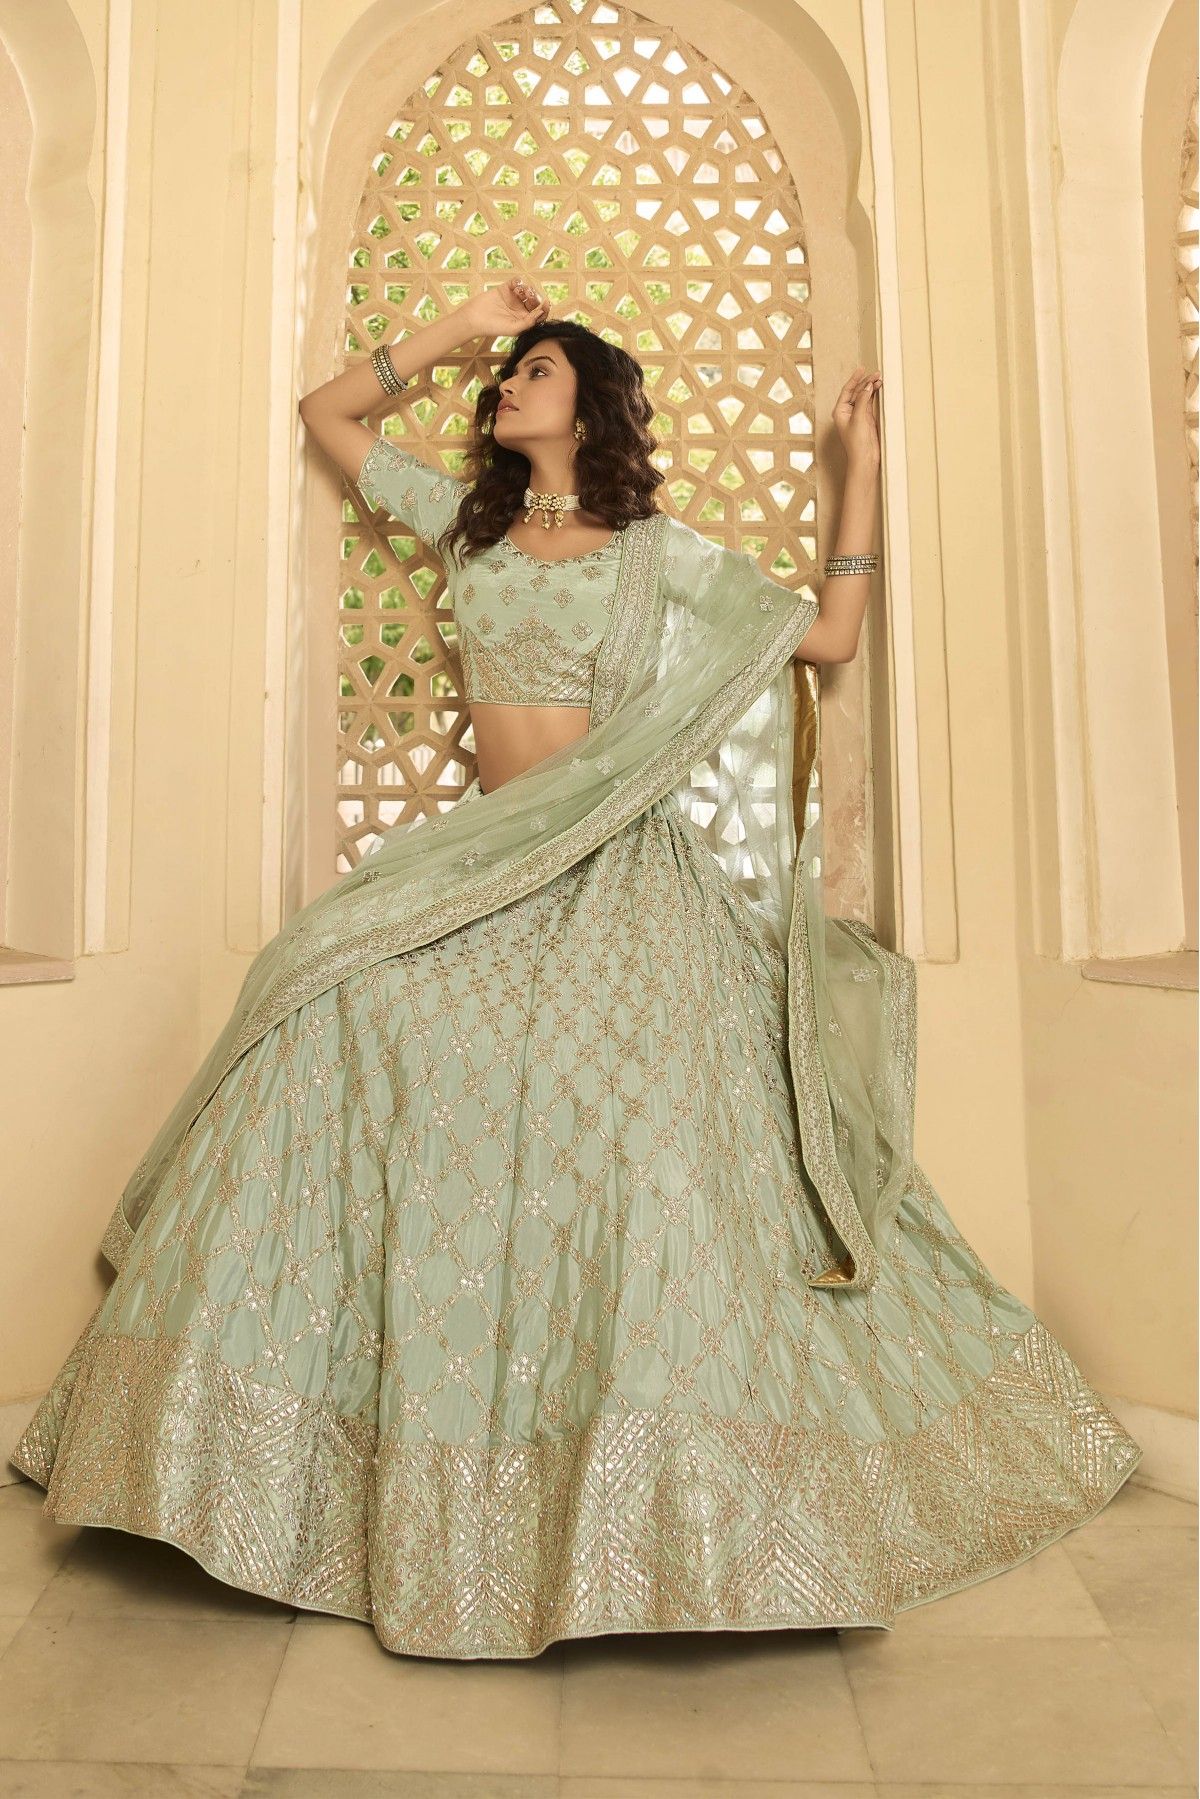 Pista Green With Golden Embroidered Lehenga/Pant Suit